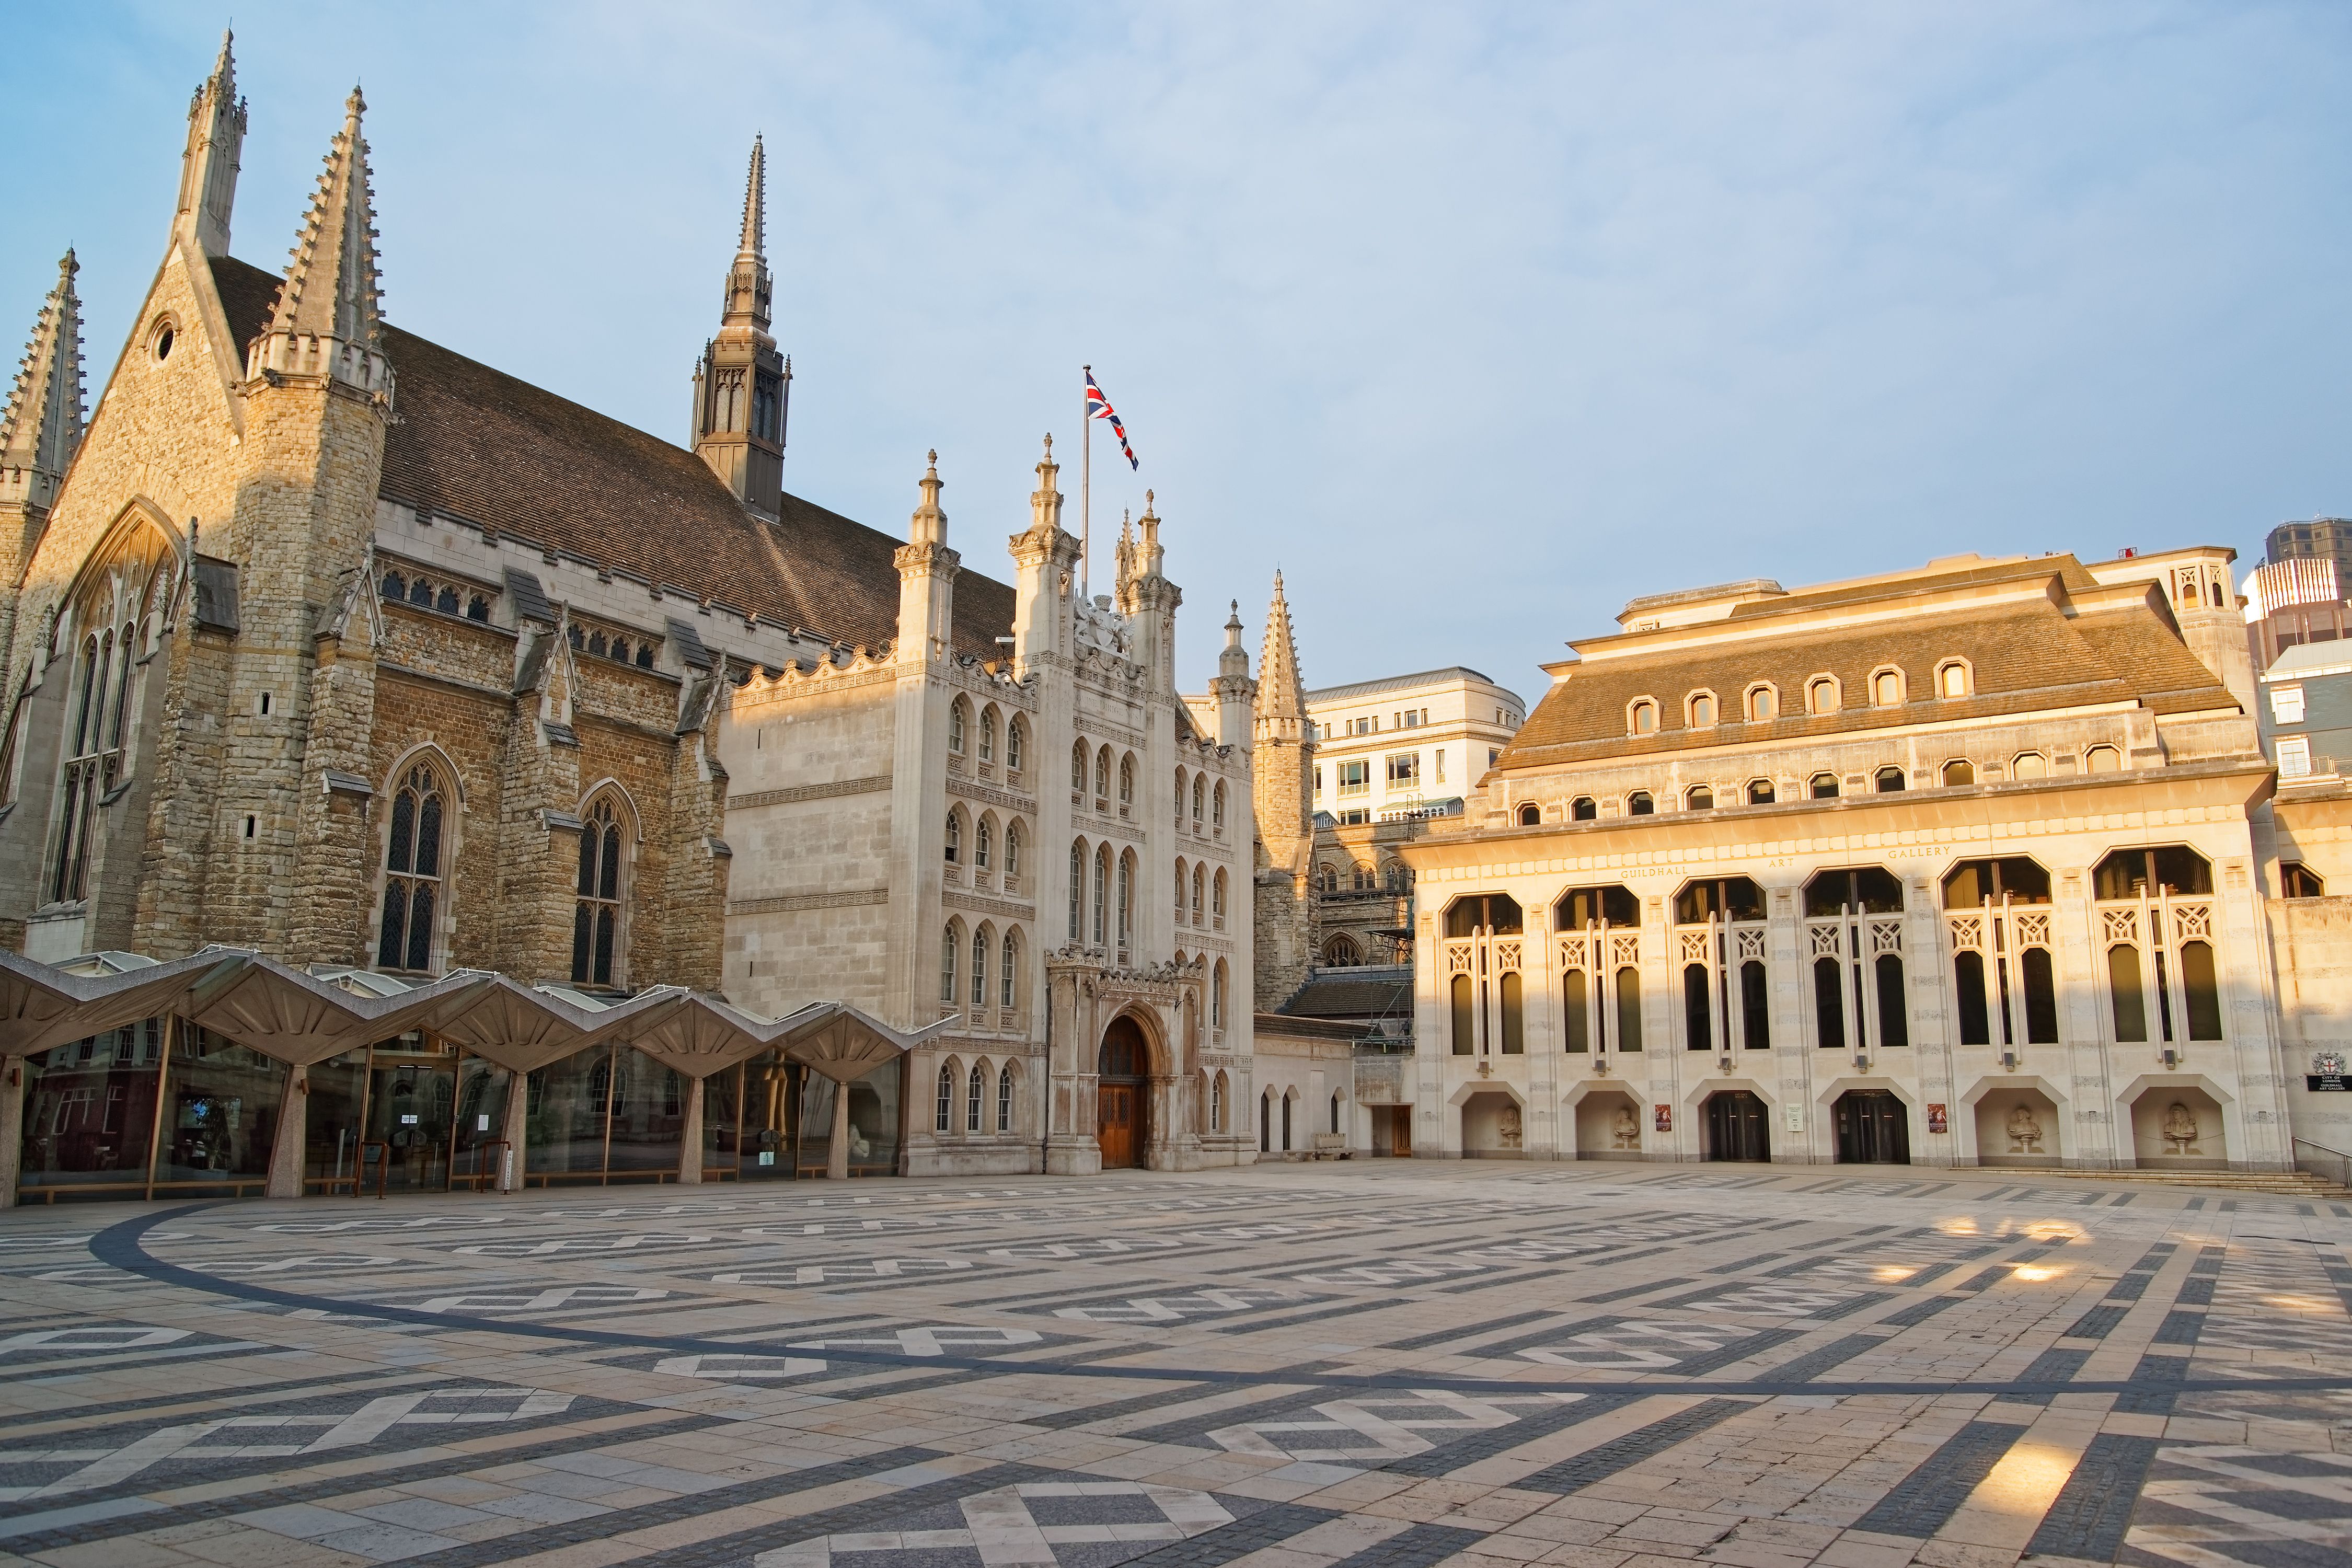 Guildhall complex with Guildhall and Guildhall Art Gallery in the city of London in the United Kingdom